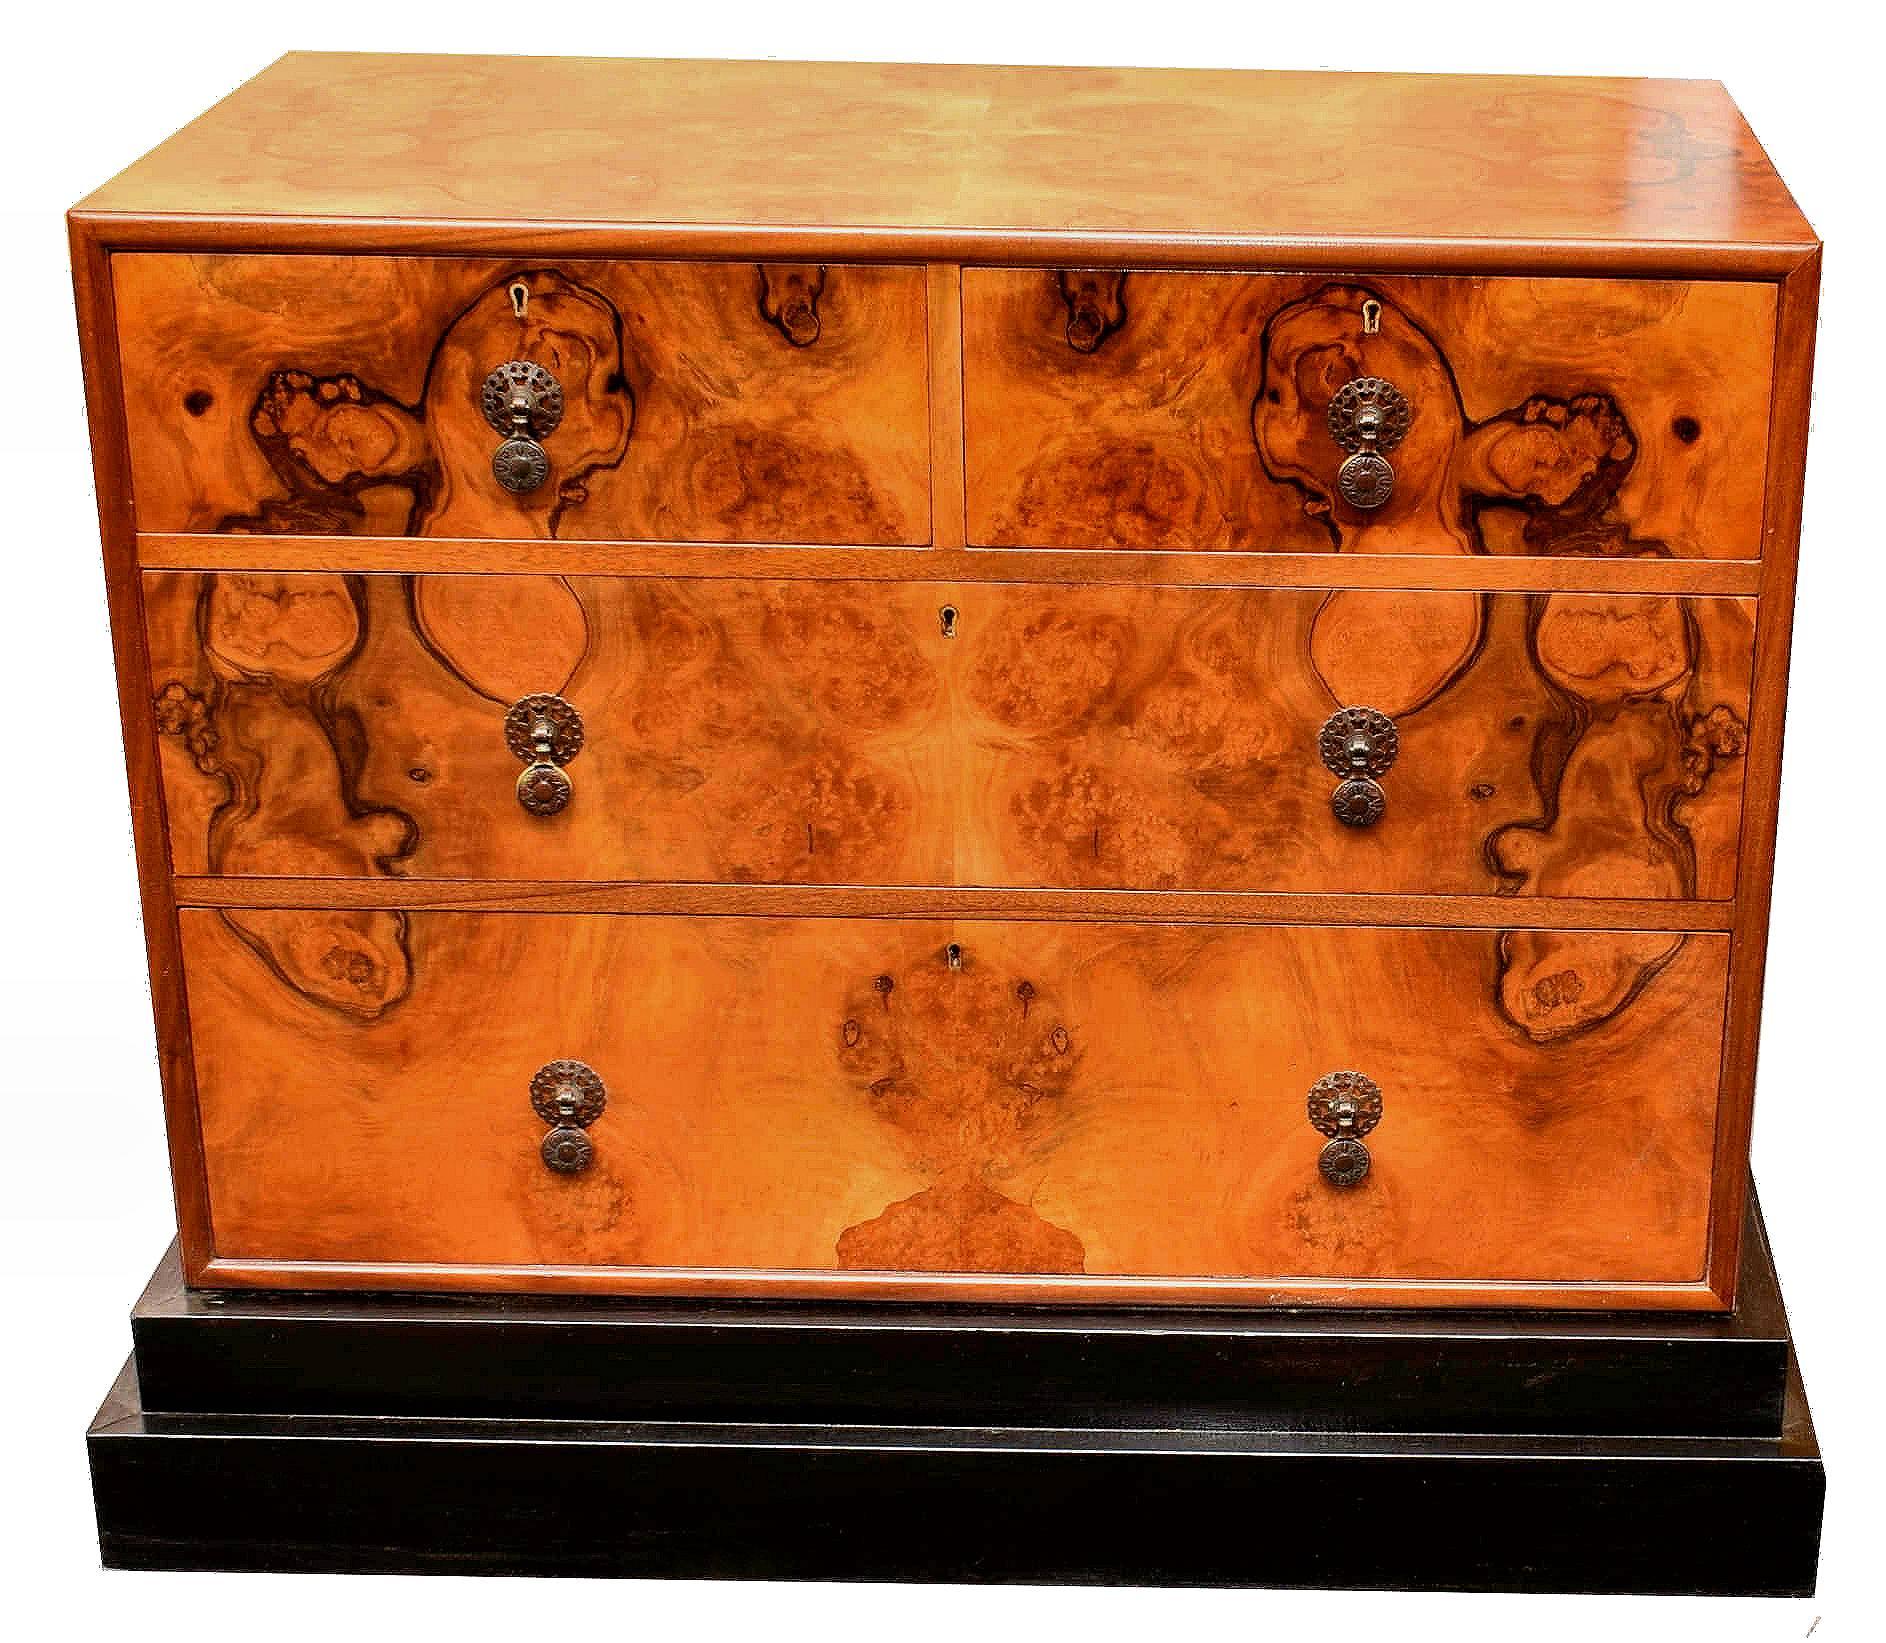 Very stylish and wonderfully figured walnut chest of drawers. The veneers are the real selling point to this piece, along with being very functional. Two large and generously sized drawers to the base with two smaller single drawers to the top. The